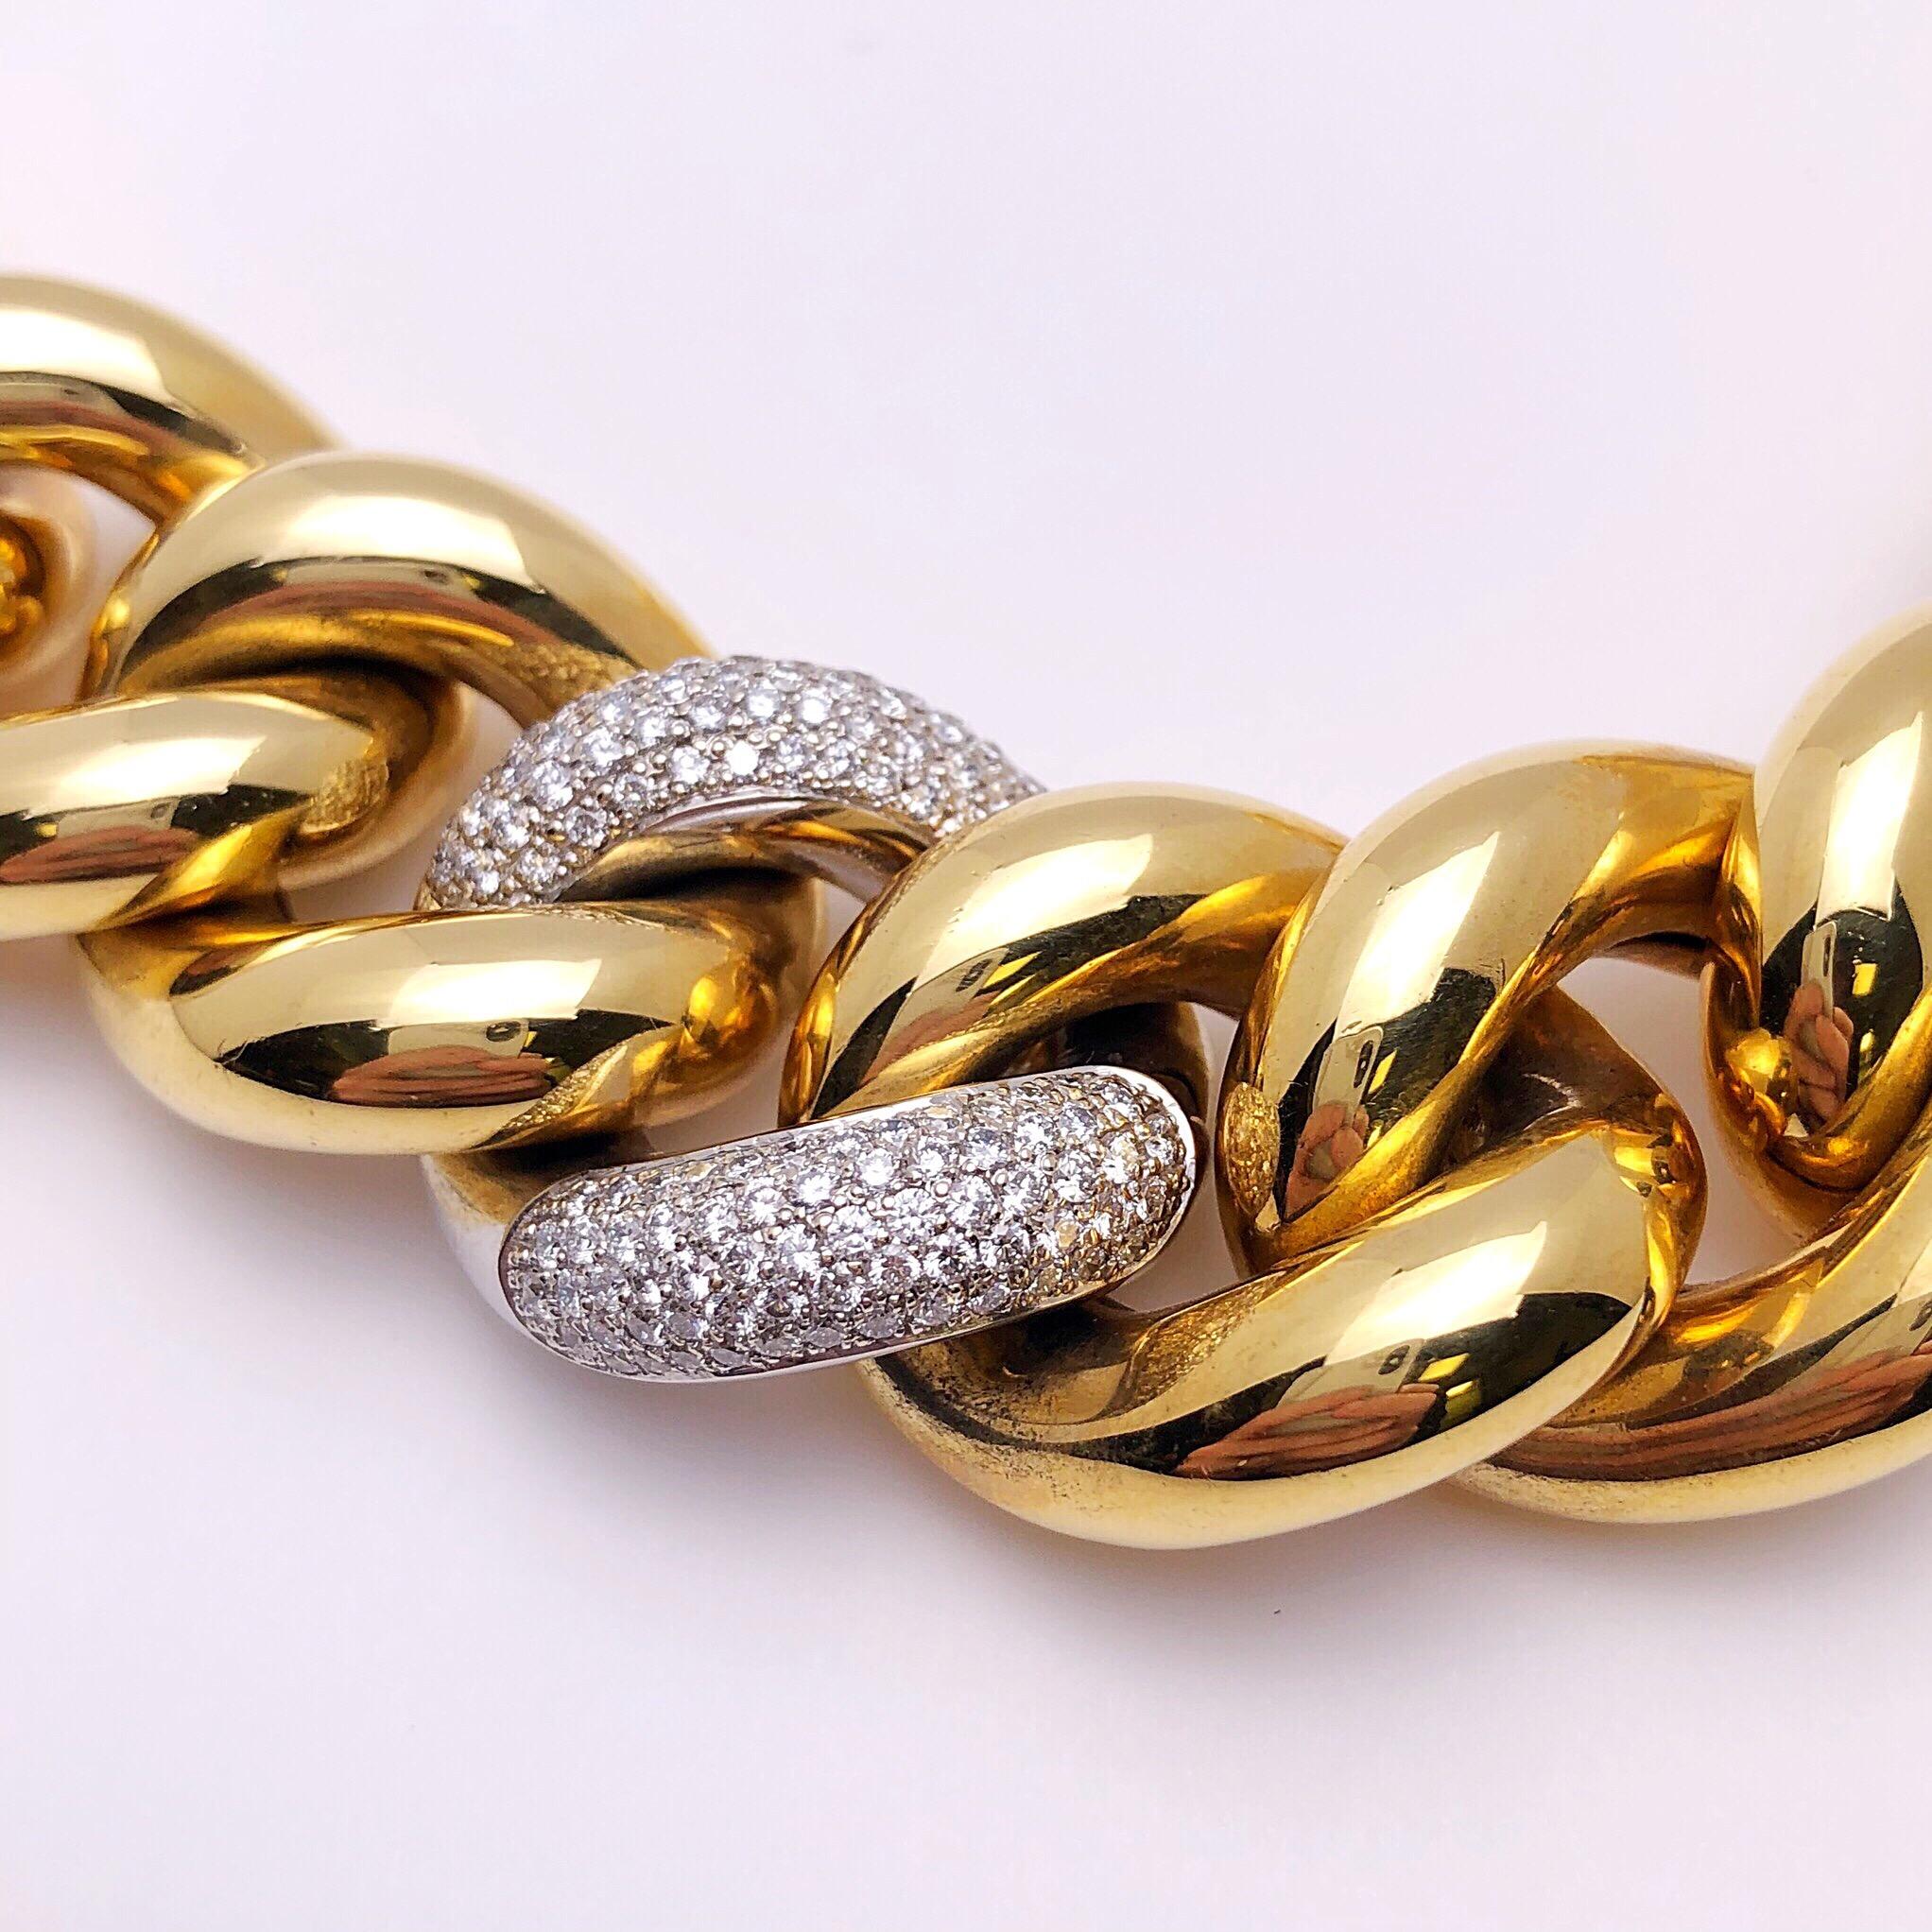 This fierce chunky gold bracelet is a definite statement piece. Twelve high polished yellow gold links and one beautifully set pave diamond link make up this classic gourmette link bracelet. 
The bracelet measures 8